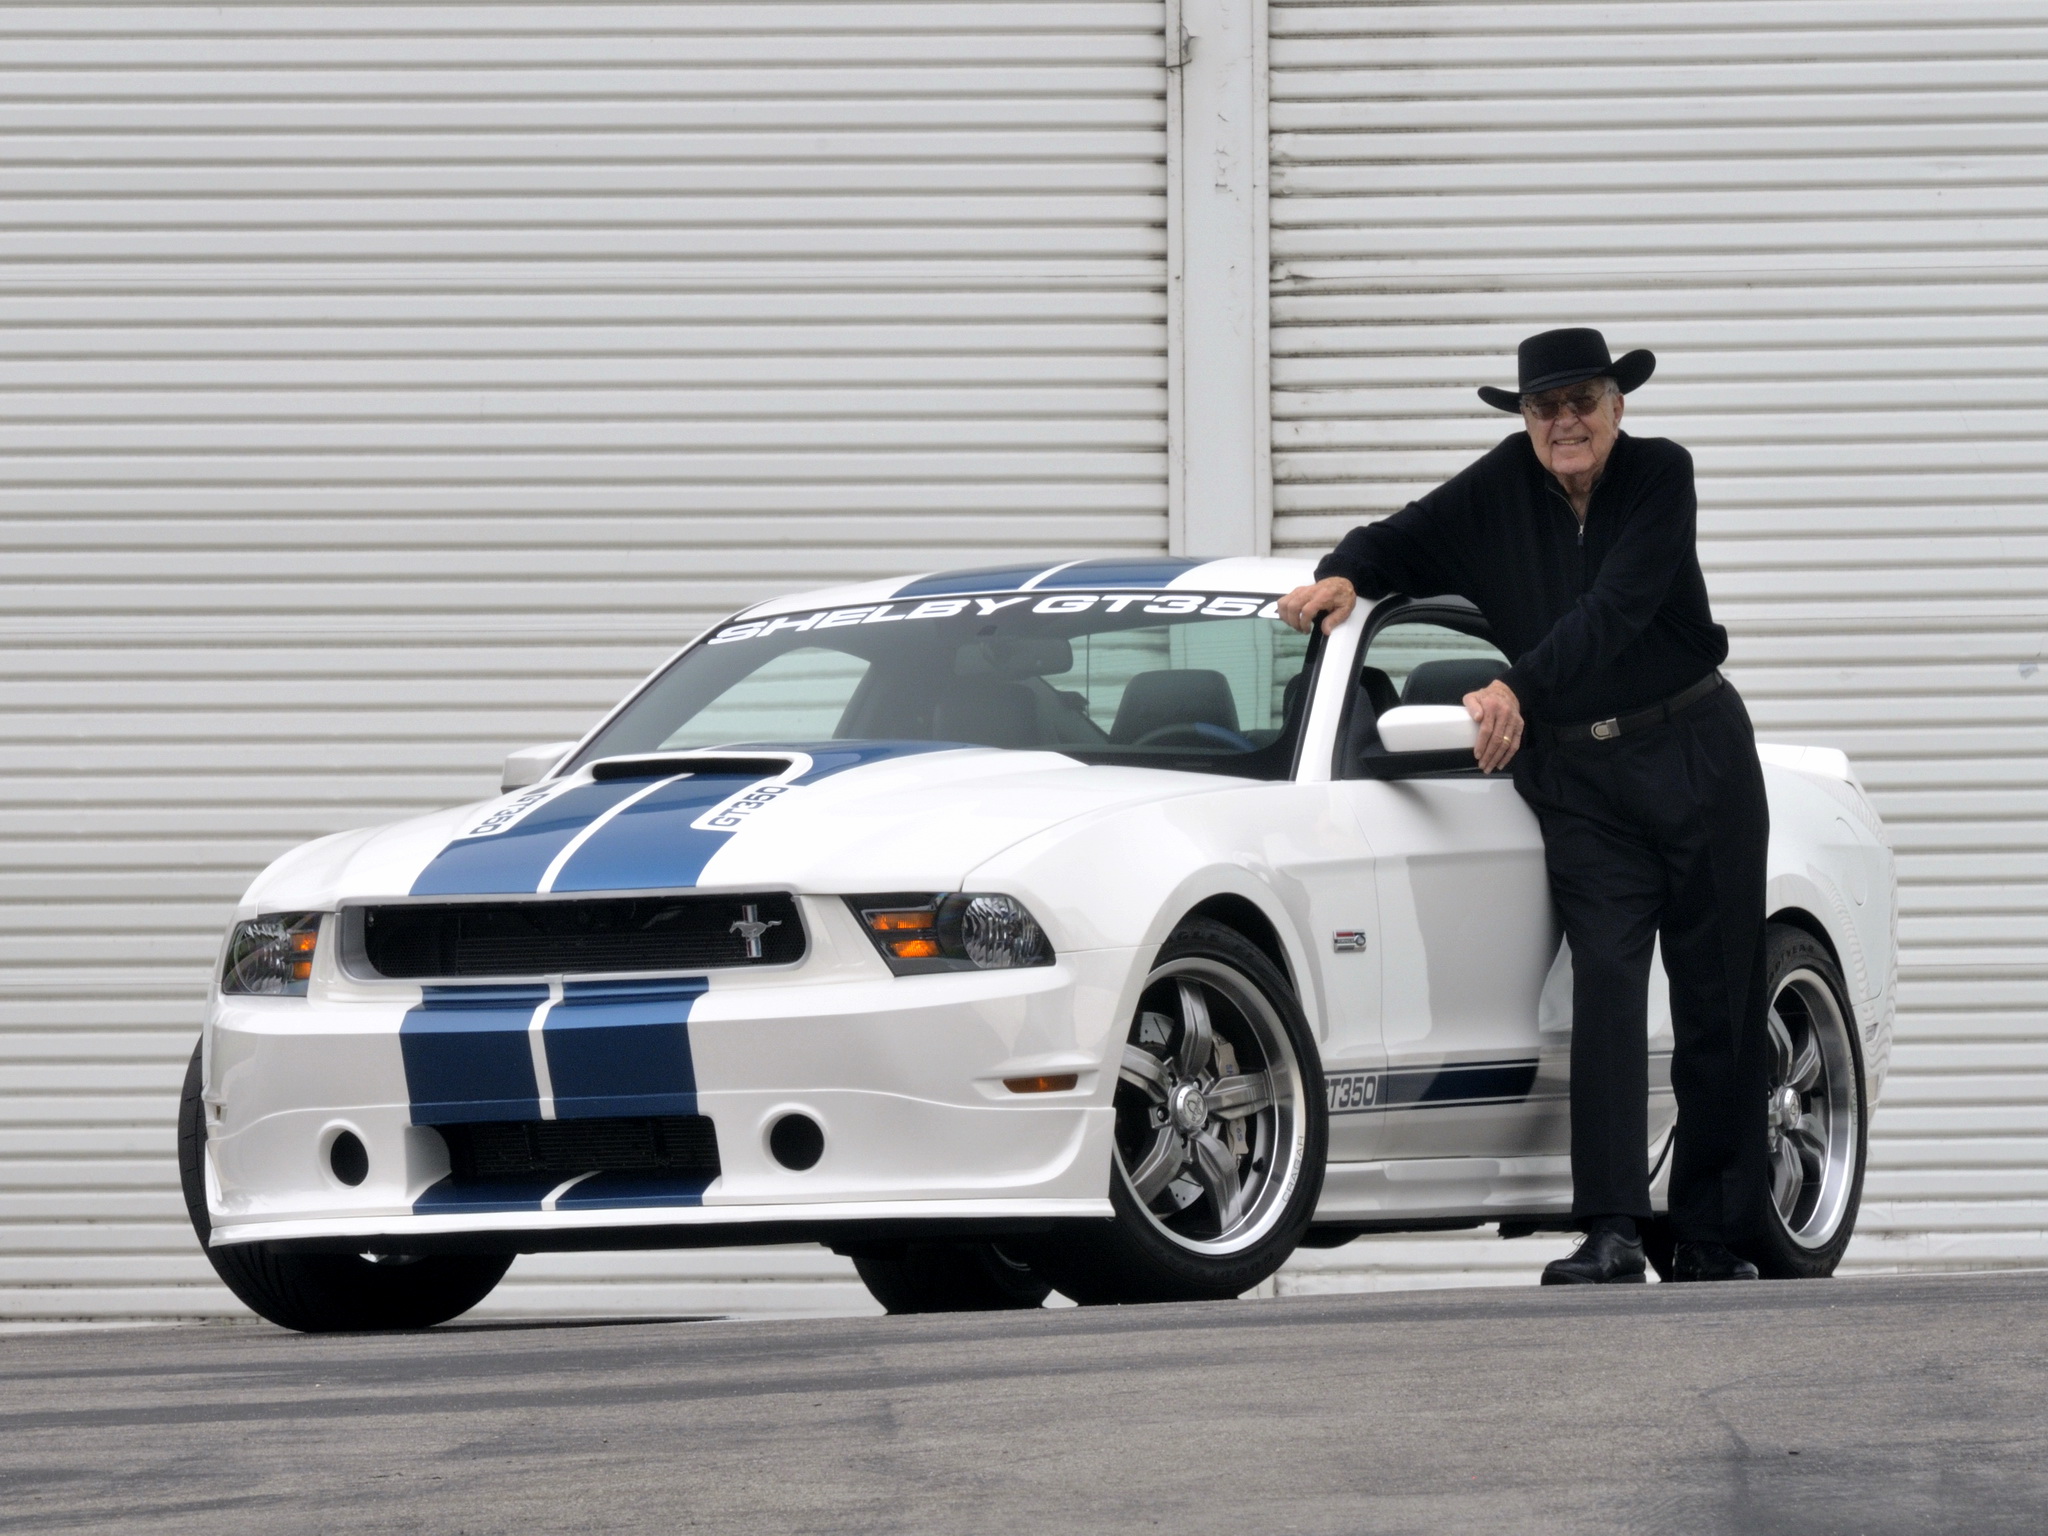 2010, Shelby, Gt350, Ford, Mustang, Muscle Wallpaper